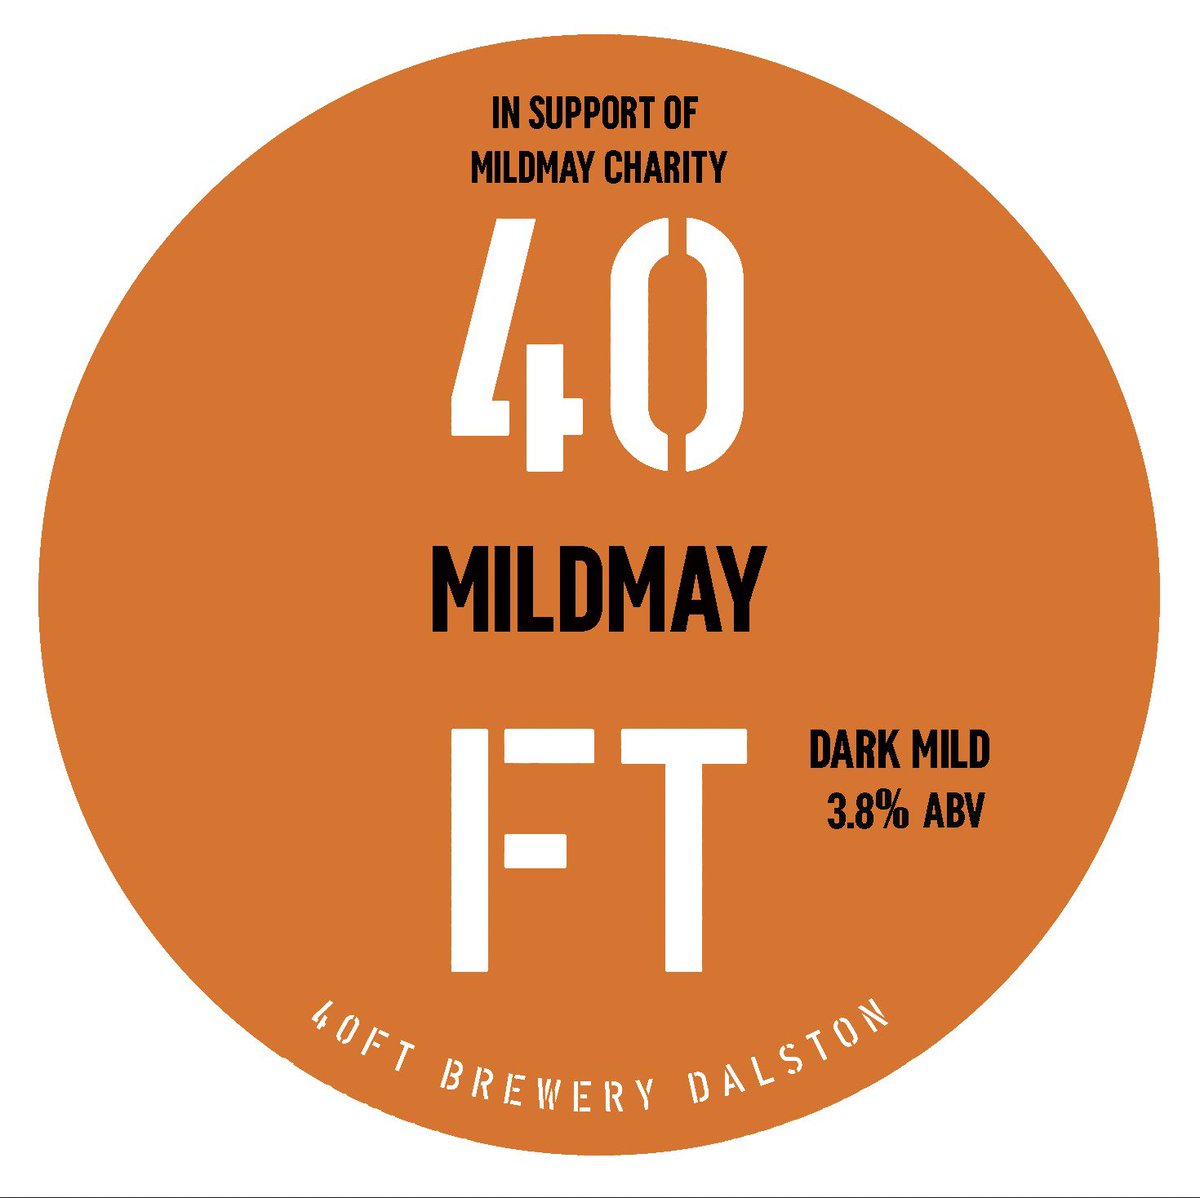 1/3 @40ftbrewery is supporting CAMRA’s ‘Mild Month’ campaign with their new Mildmay cask - available at their Dalston taproom from Thursday 2nd May, as well as at The Scolt Head, The Prince Arthur, The Robin and St John Smithfield. Can’t wait to try it.